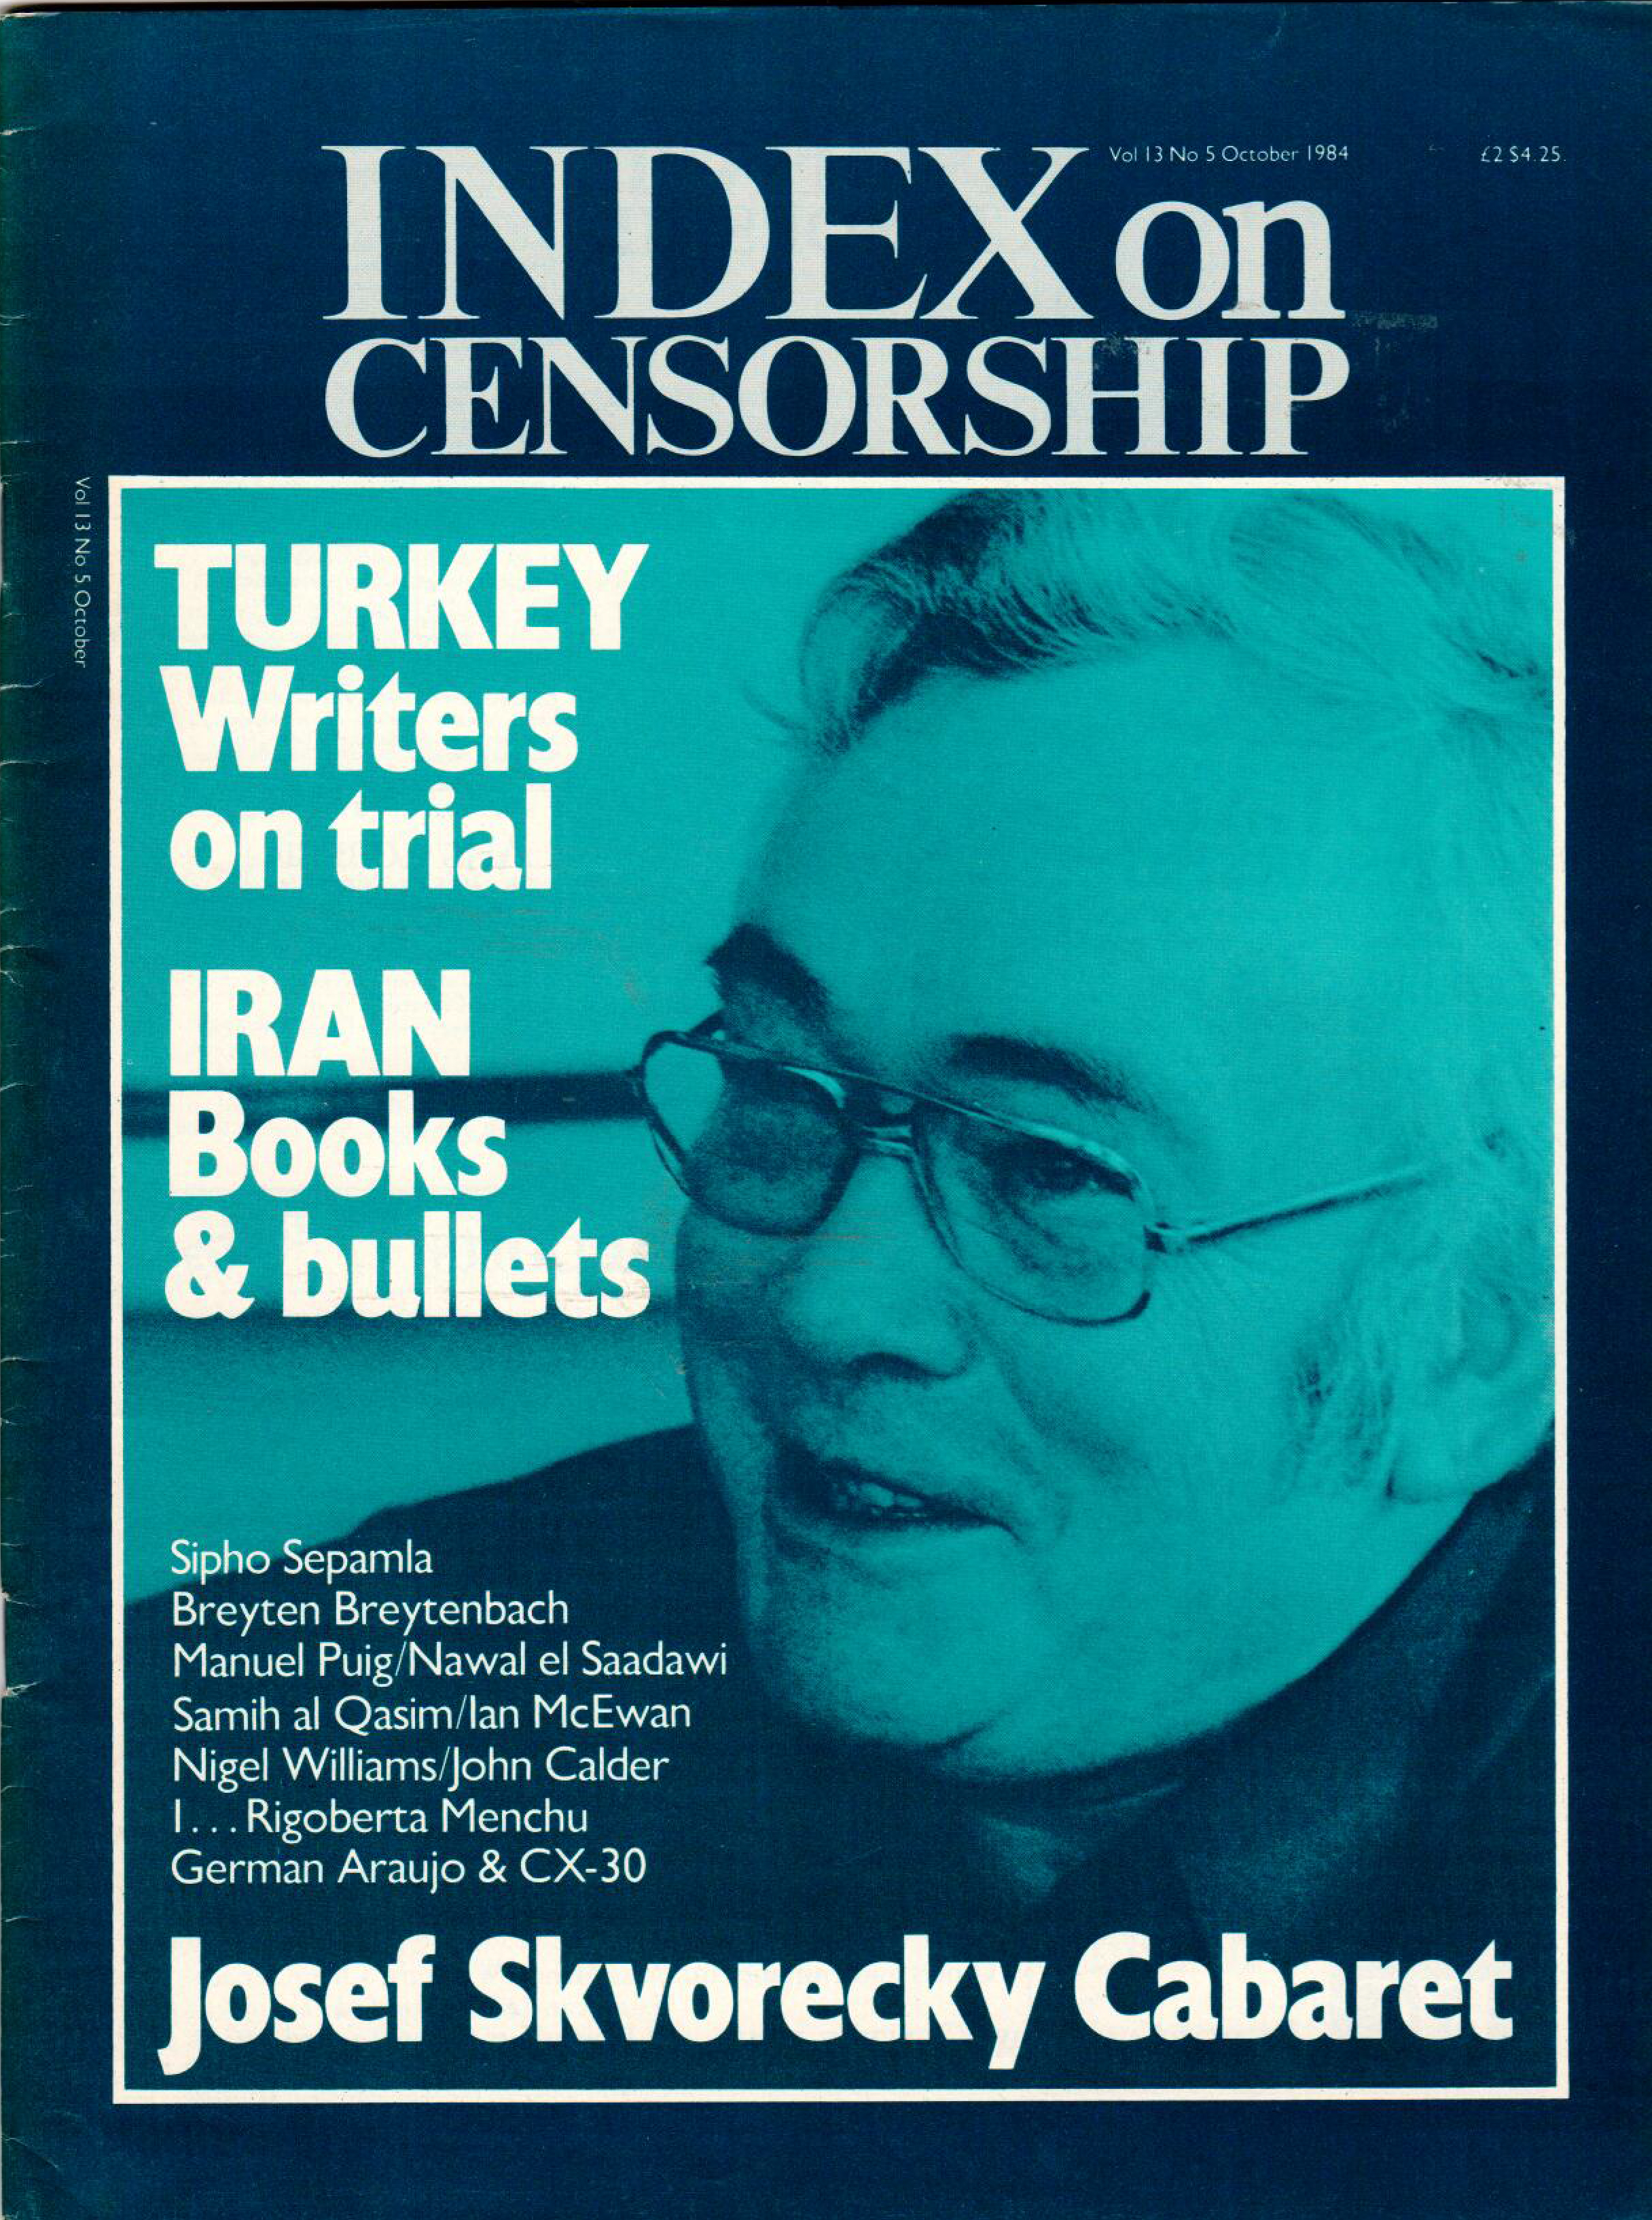 Turkey: Writers on trial, the October 1984 issue of Index on Censorship magazine.